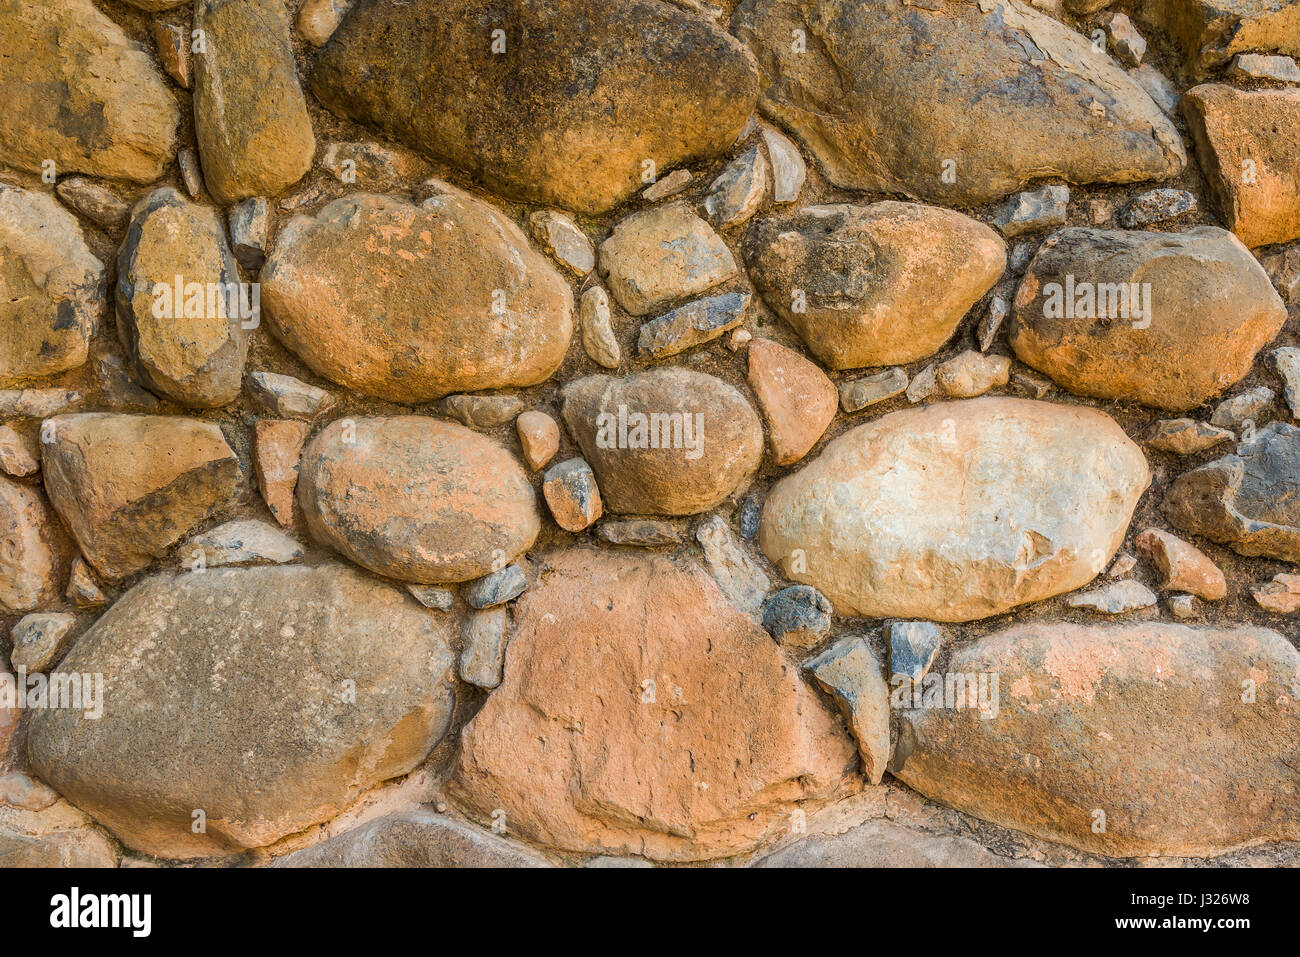 Background of stone wall in Shivta - ancient city in the Negev Desert, Israel Excavations of an ancient stone wall Stock Photo